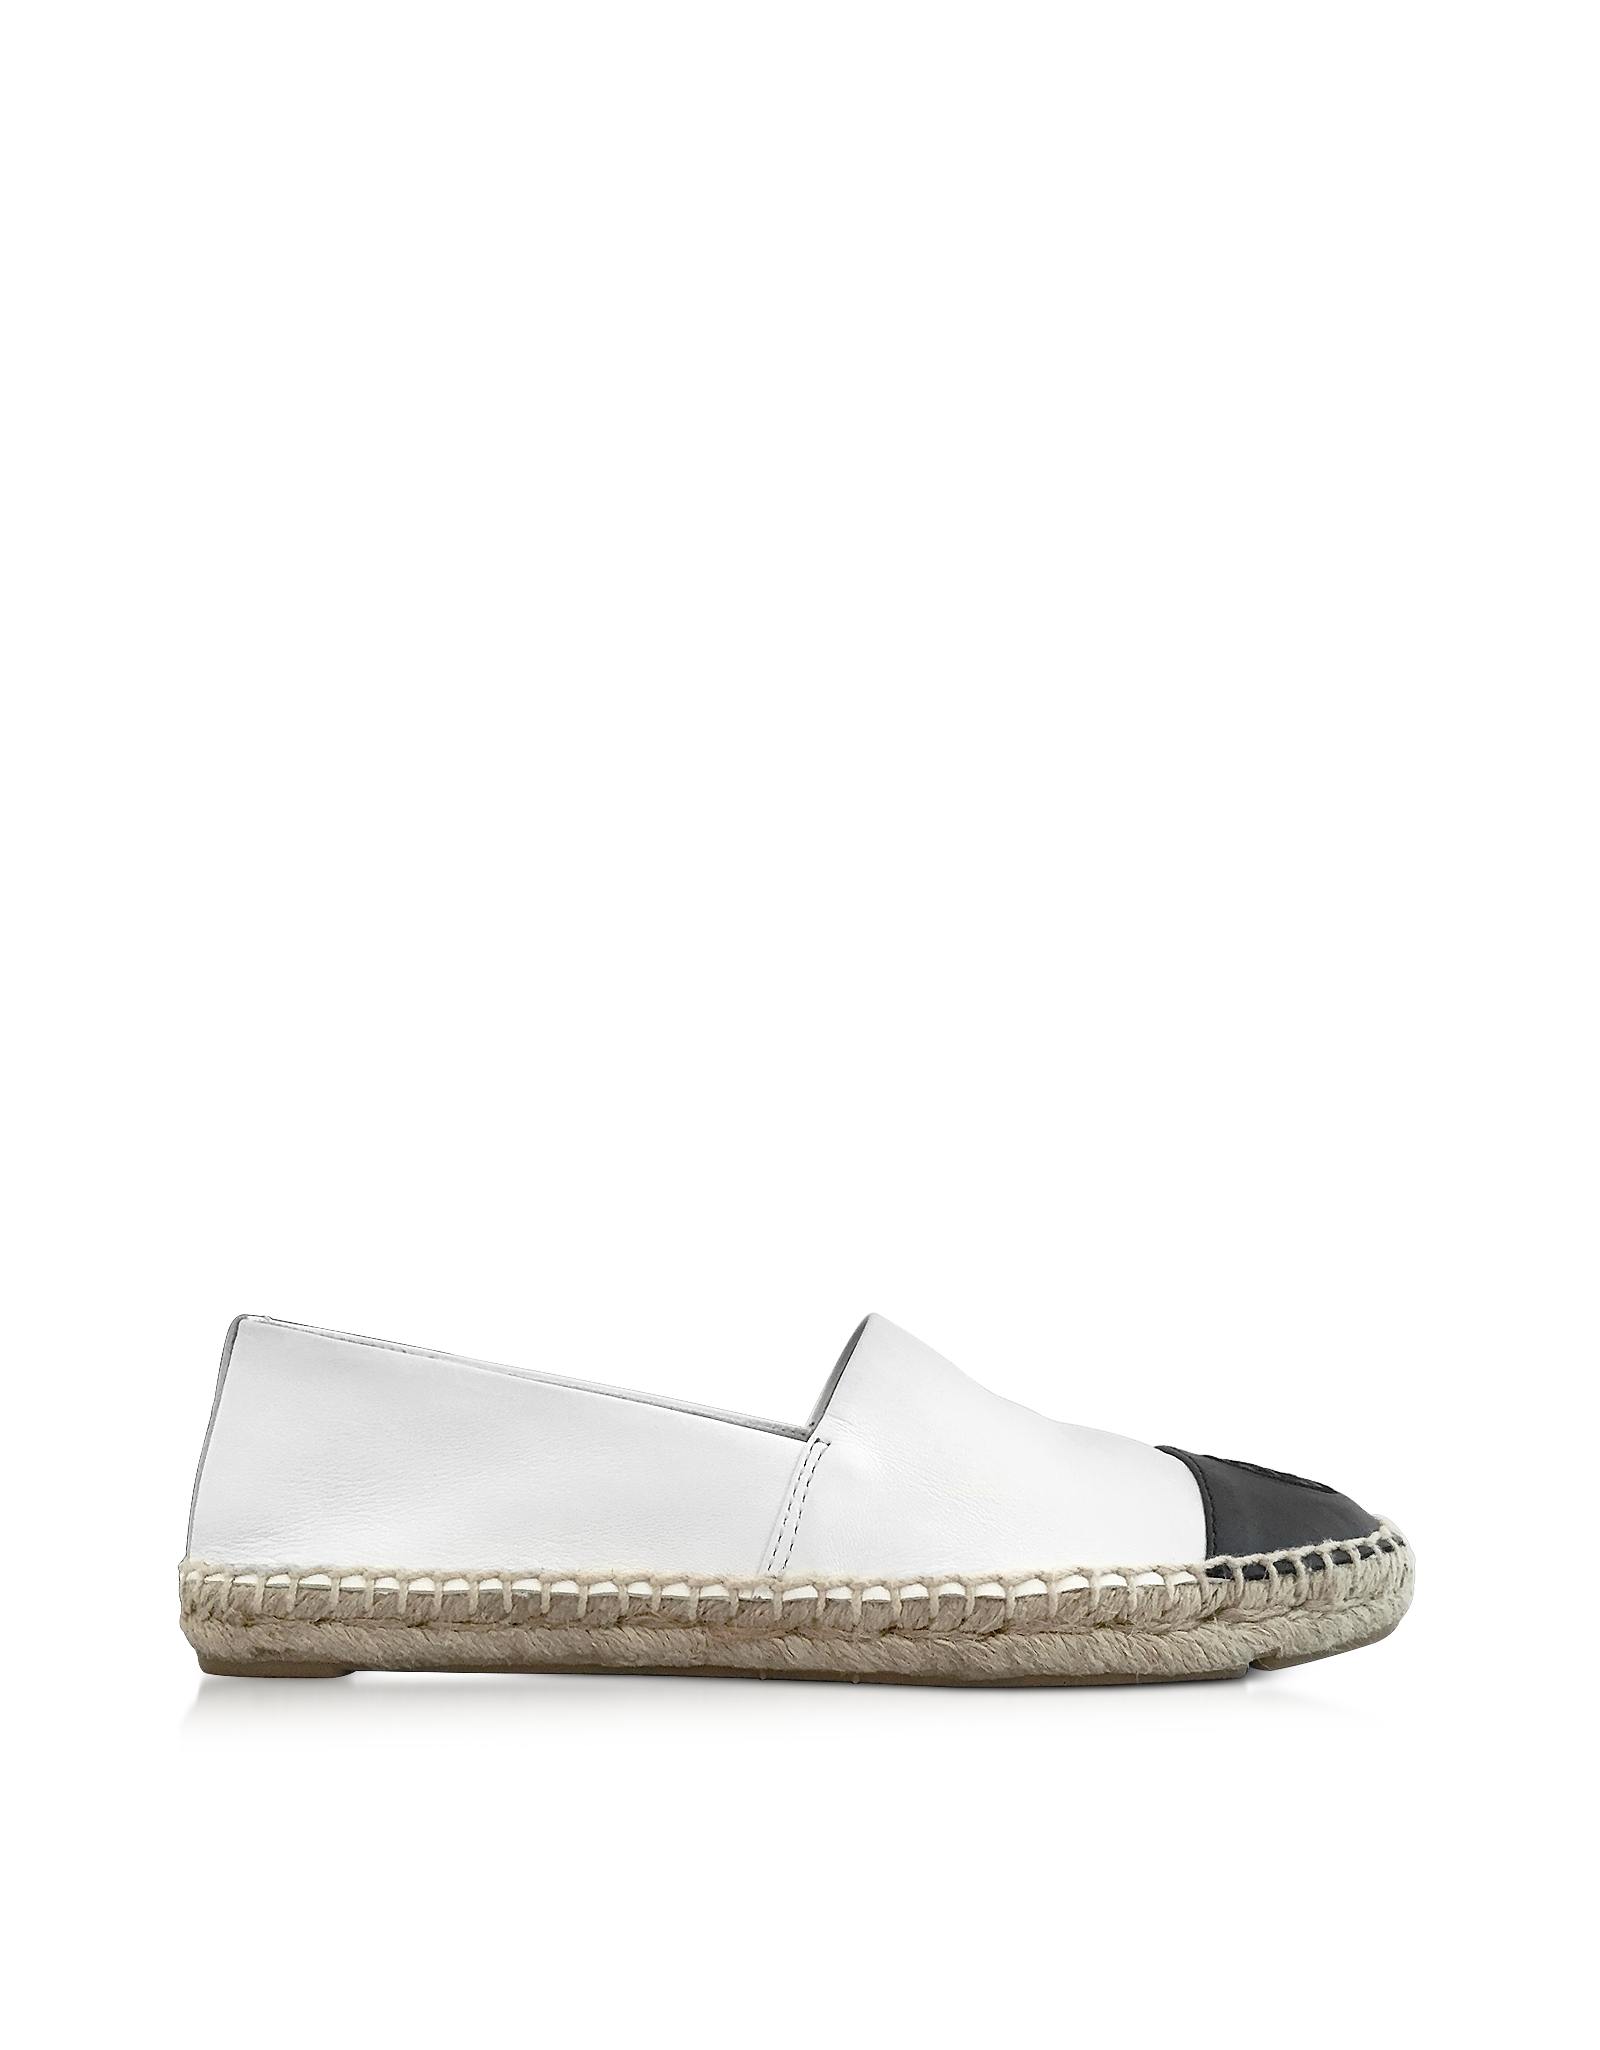 Lyst - Tory Burch Color Block Leather Flat Espadrille in Black